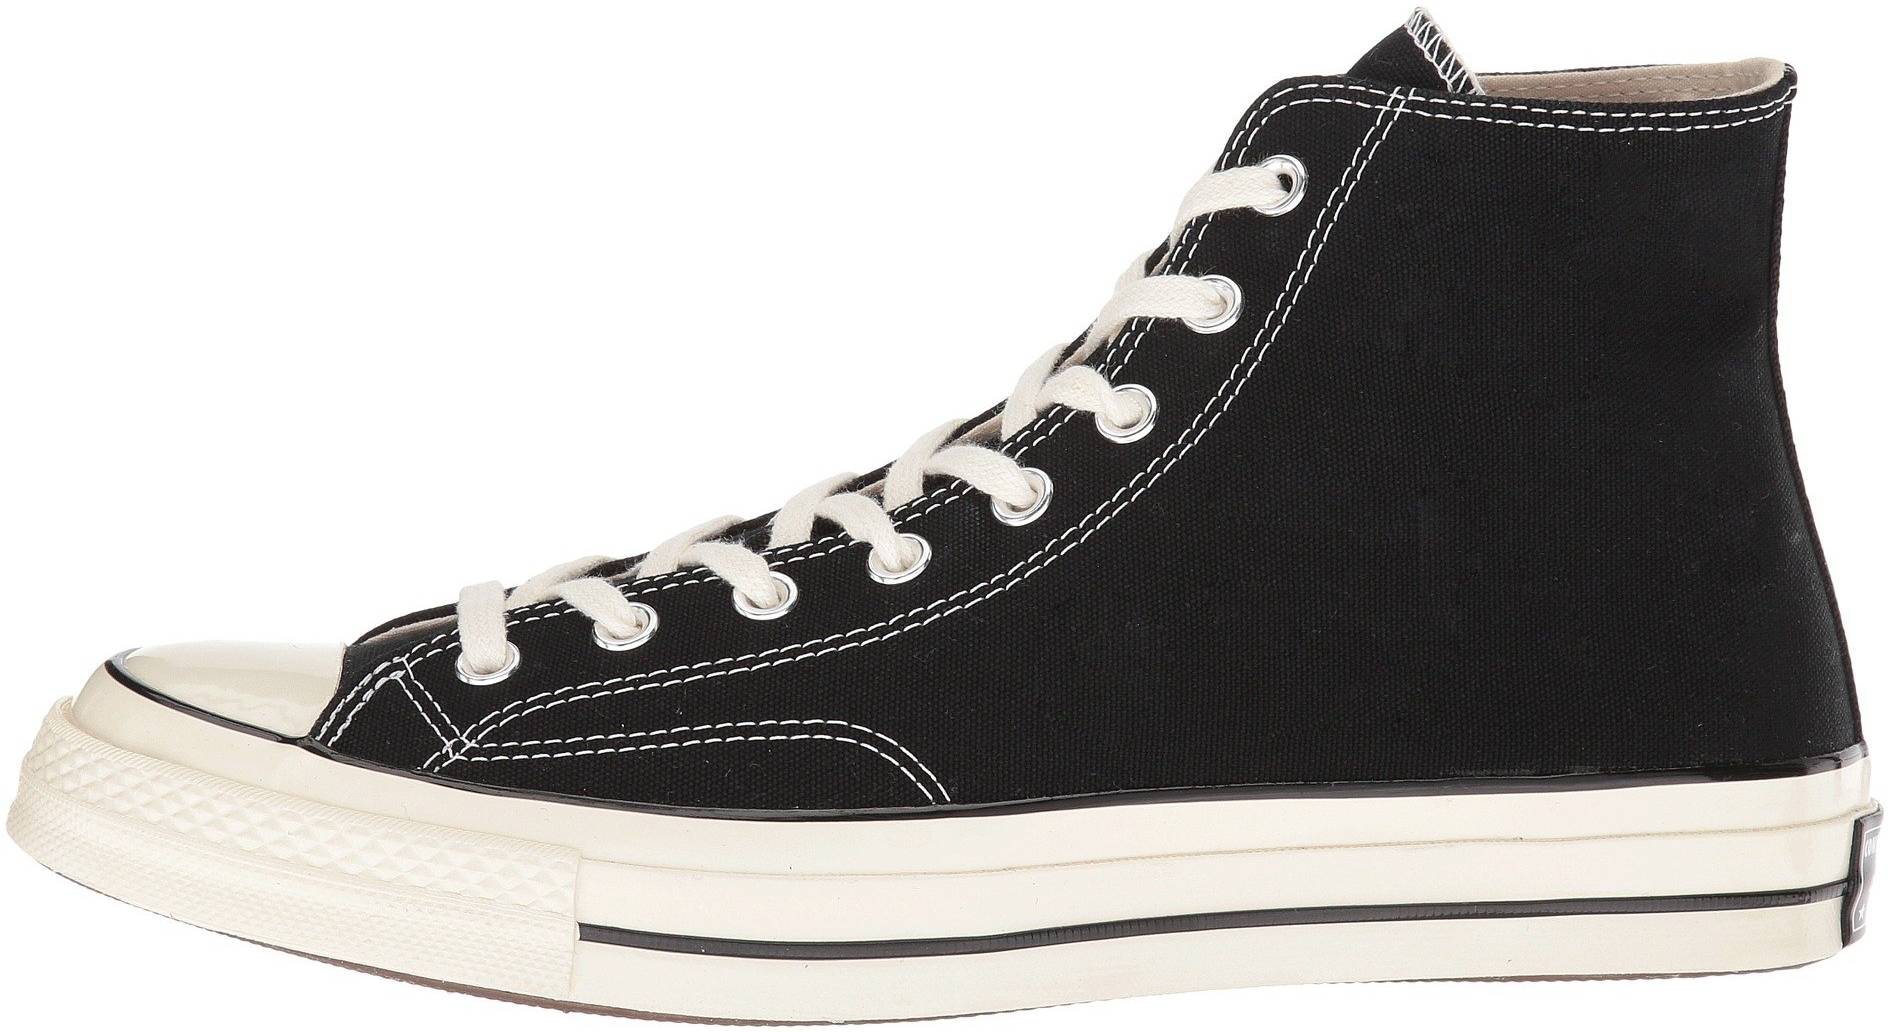 specificere hud Habubu Converse Chuck Taylor All Star 70 High Review, Facts, Comparison | RunRepeat